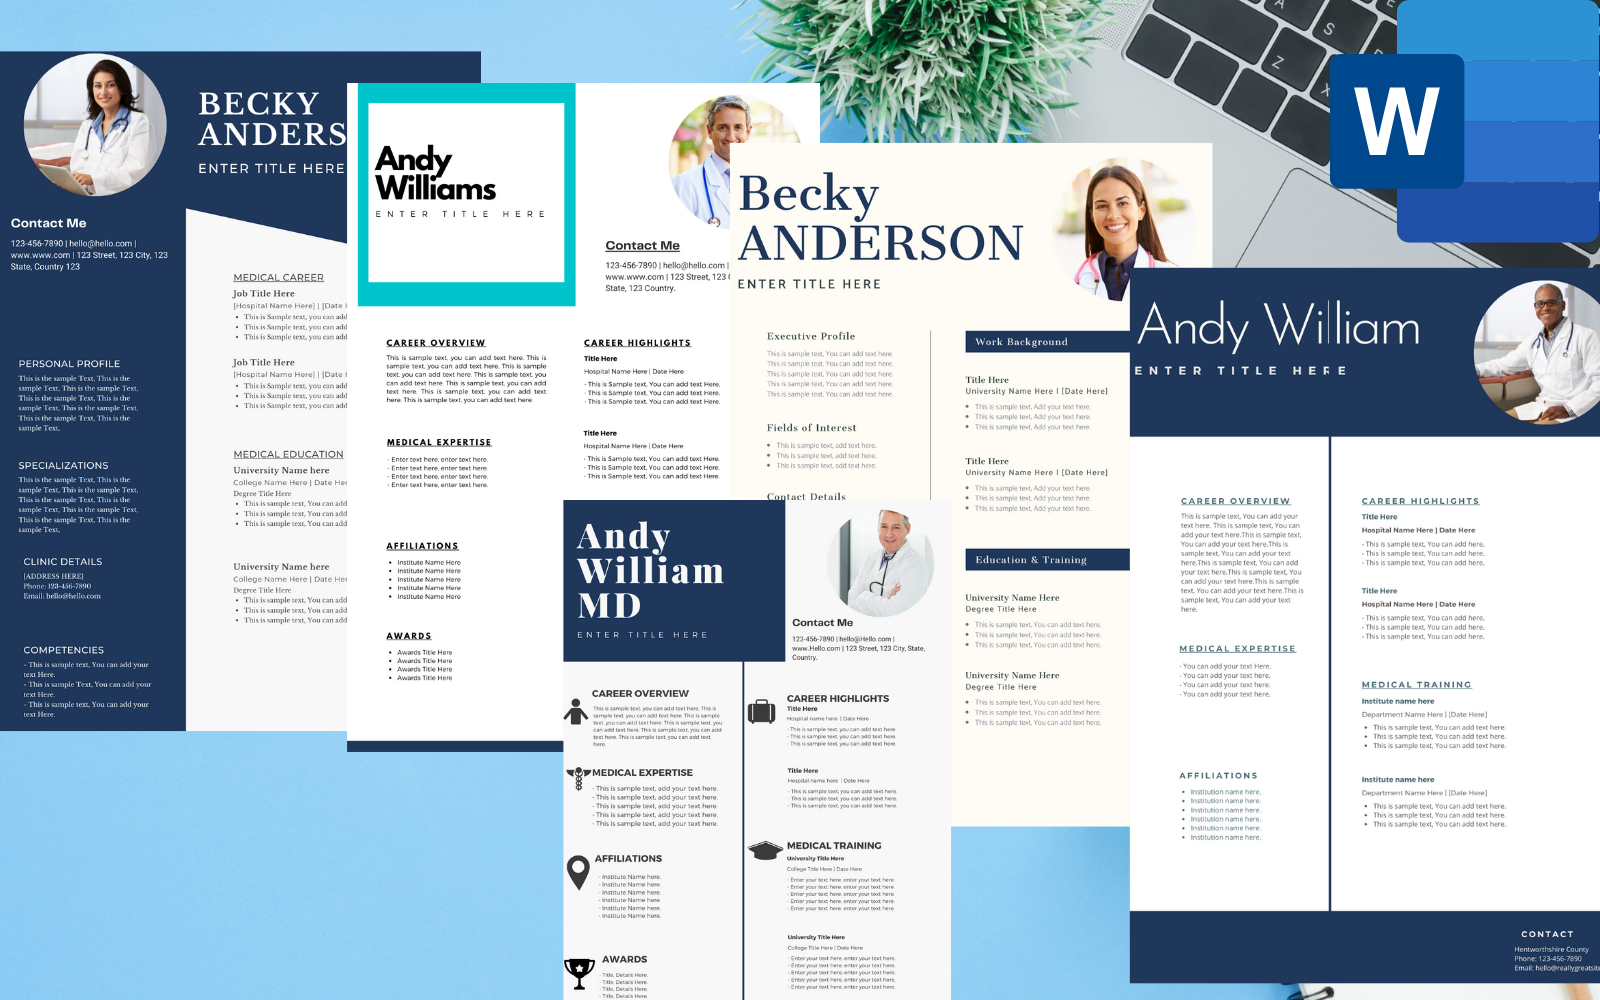 Pack of 5 Resume Templates for Doctors - Microsoft word.